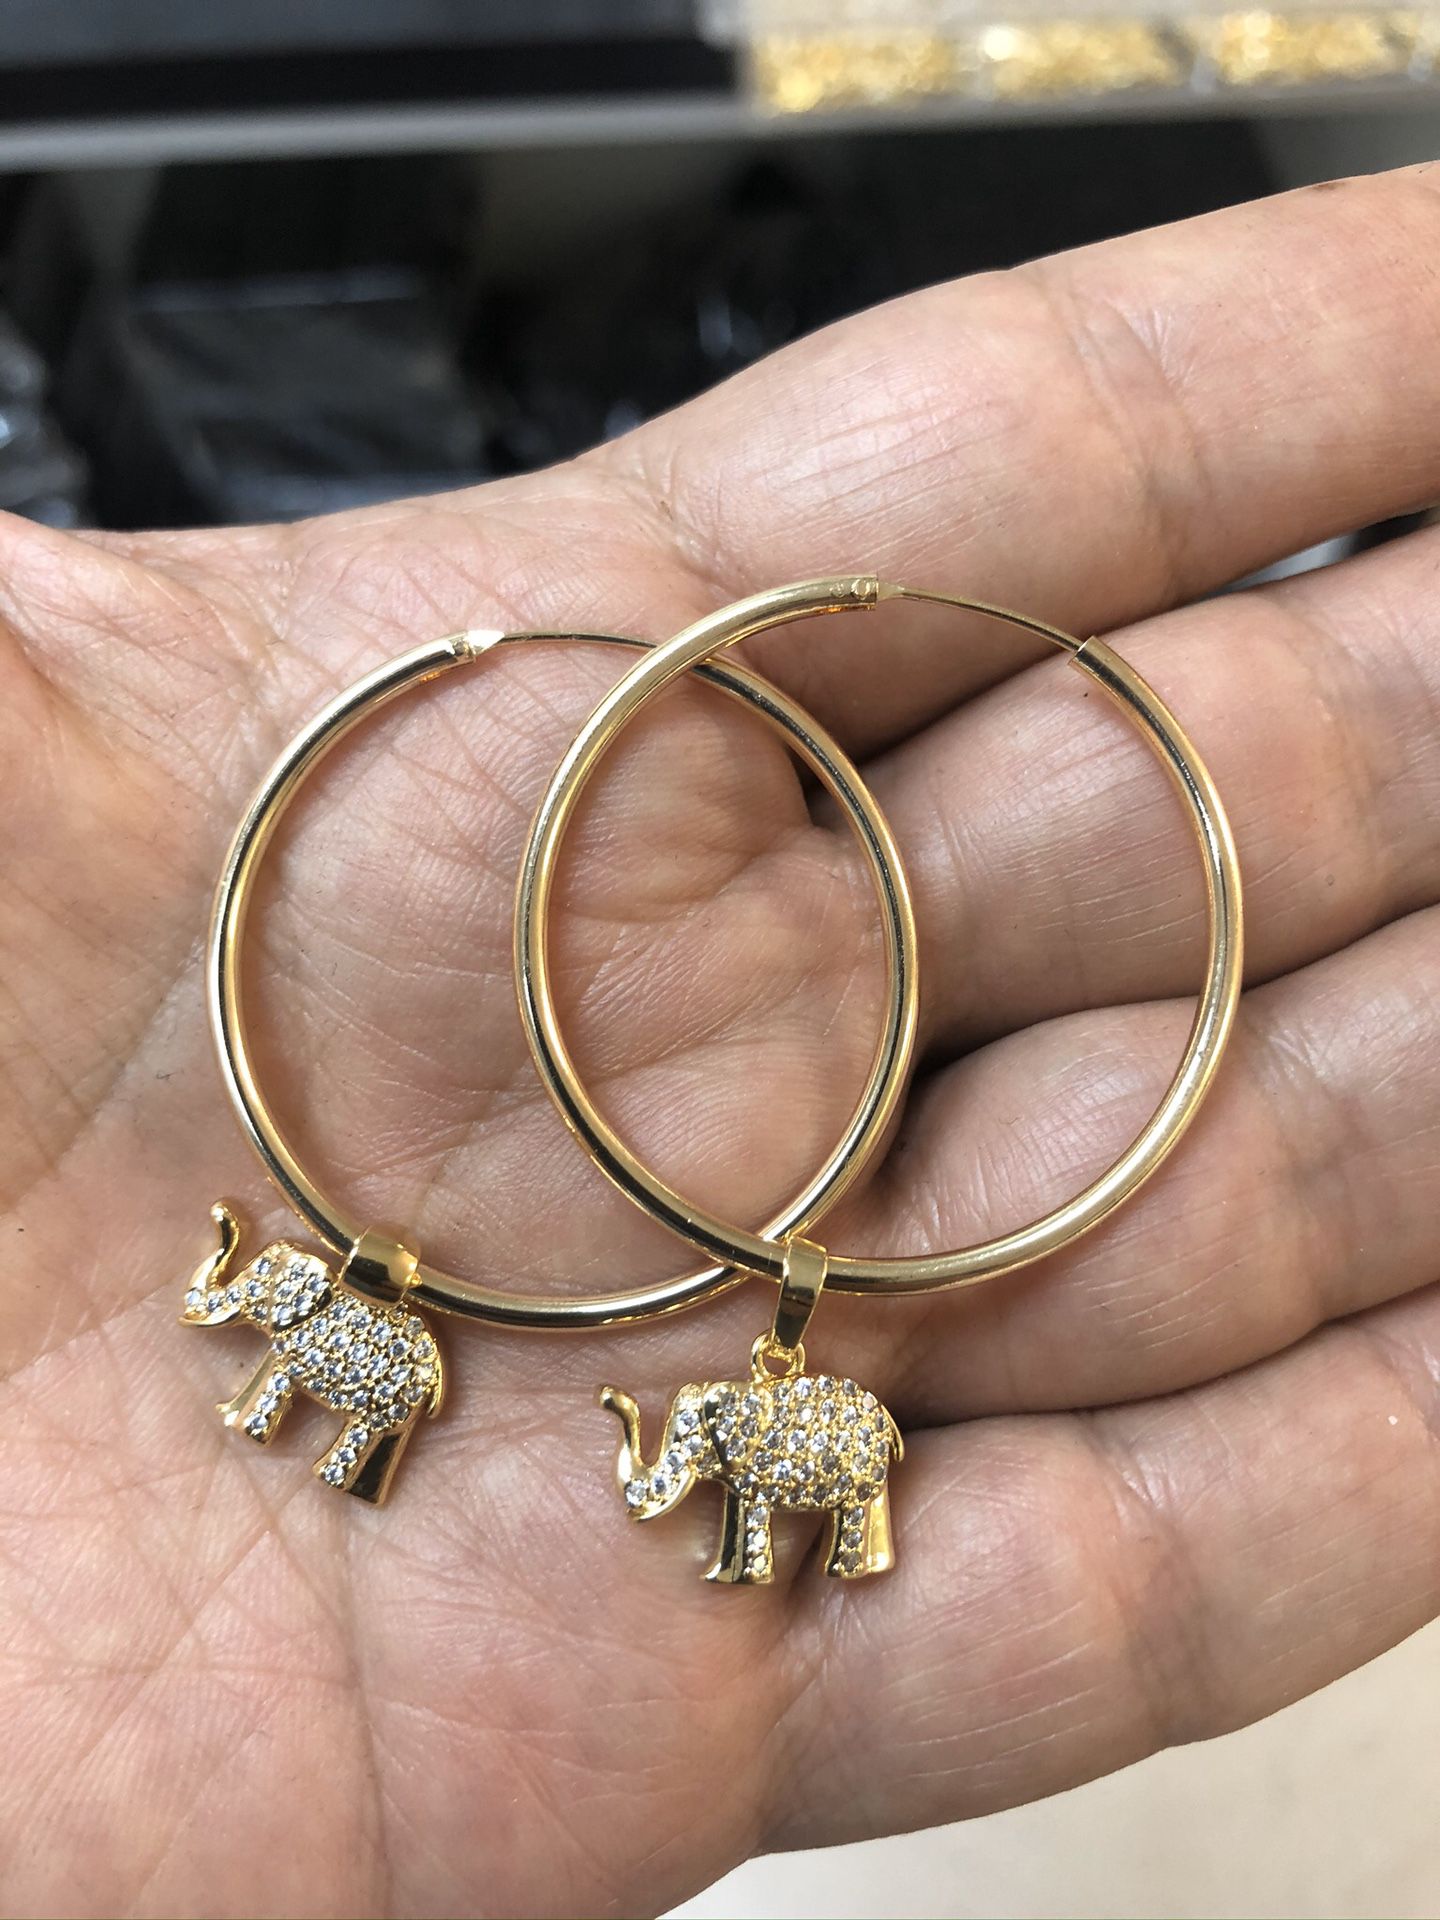 New arrival beautiful hoops earring with pave cz stones elephants 🐘 charms best quality ❤️❤️❤️14k gold filled hypoallergenic (hoop Available in diffe